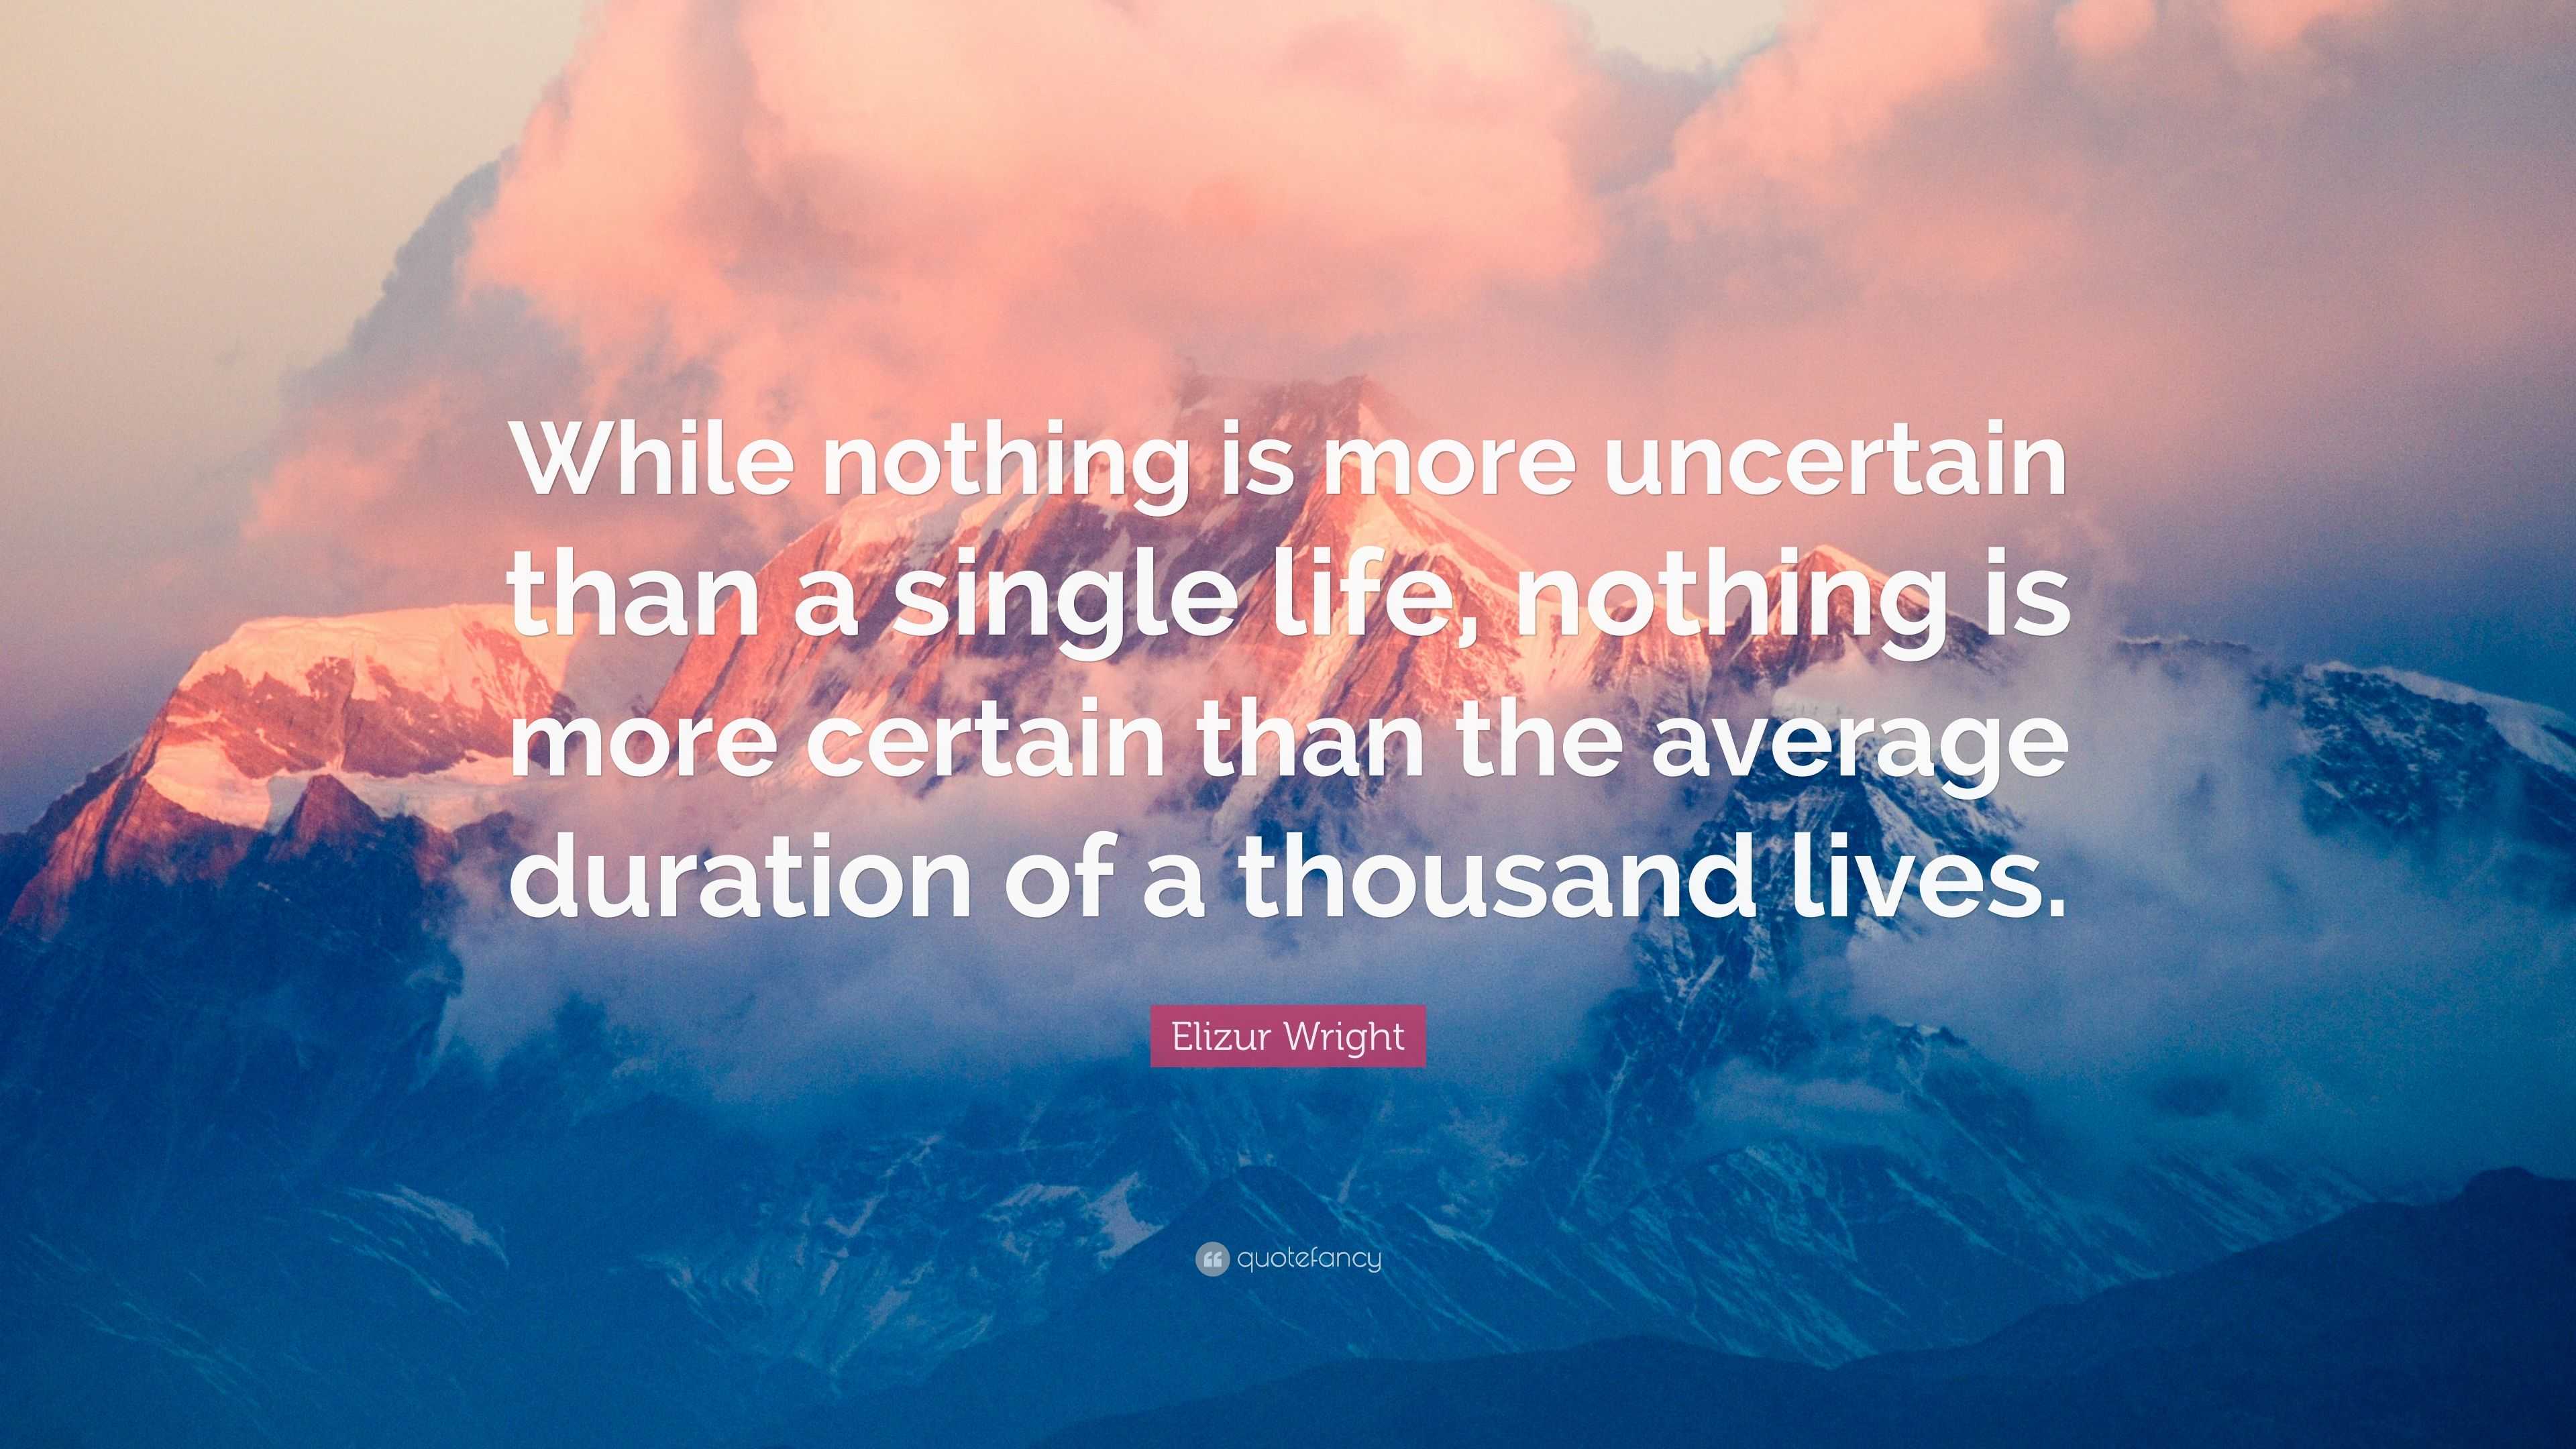 Elizur Wright Quote: “While nothing is more uncertain than a single ...